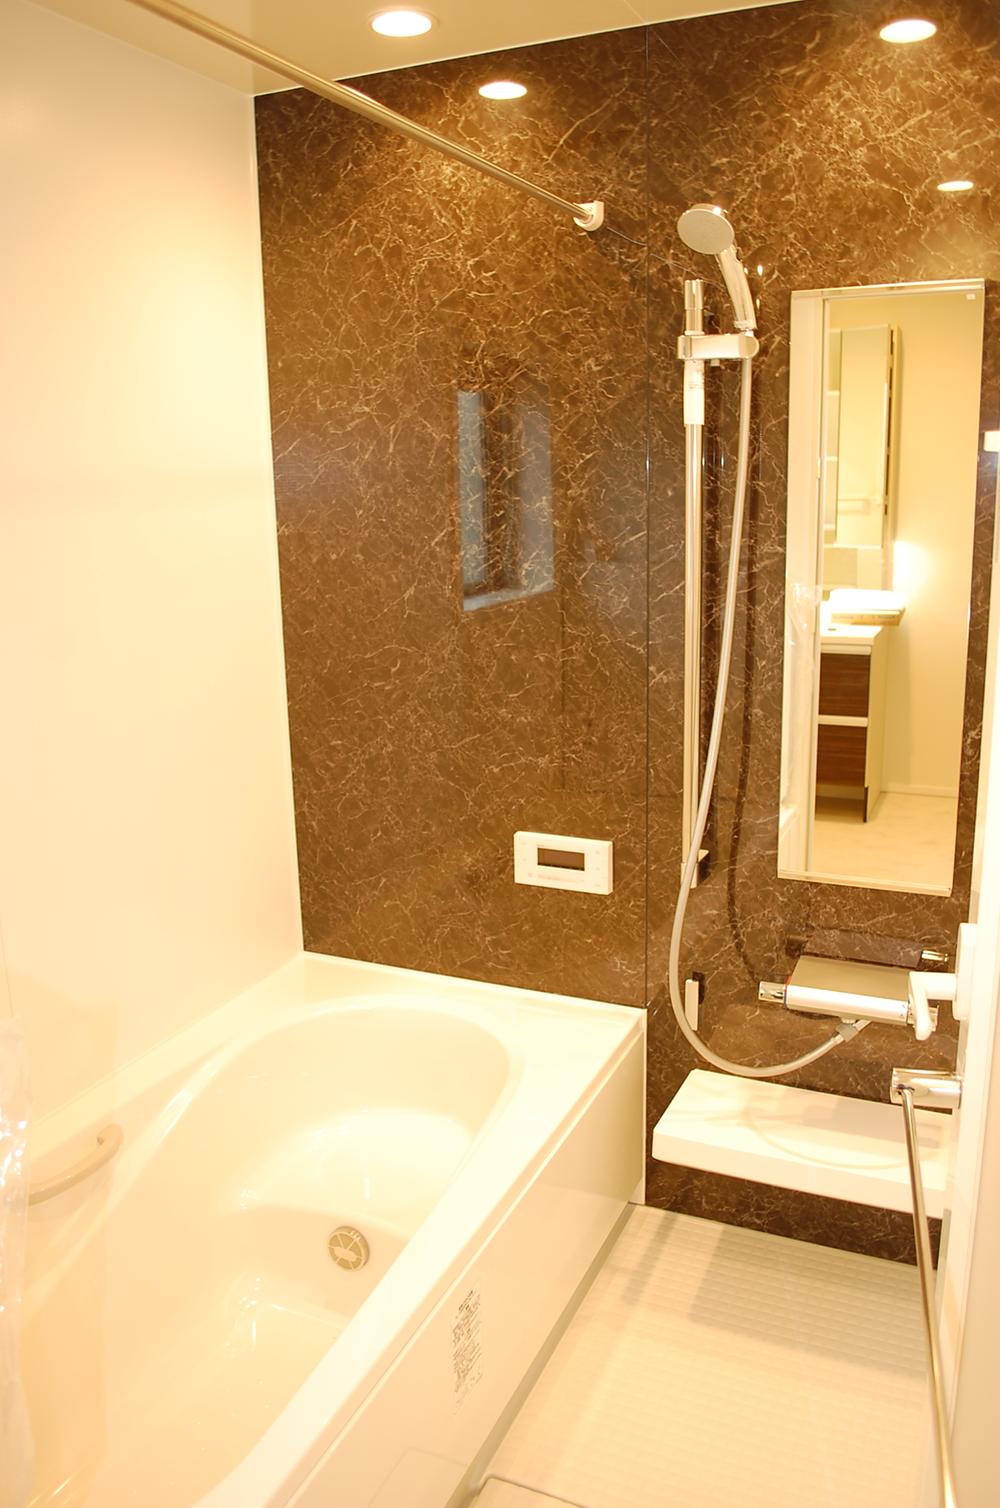 Bathroom. It was fashionable finish in downlight lighting. Ease of use everywhere